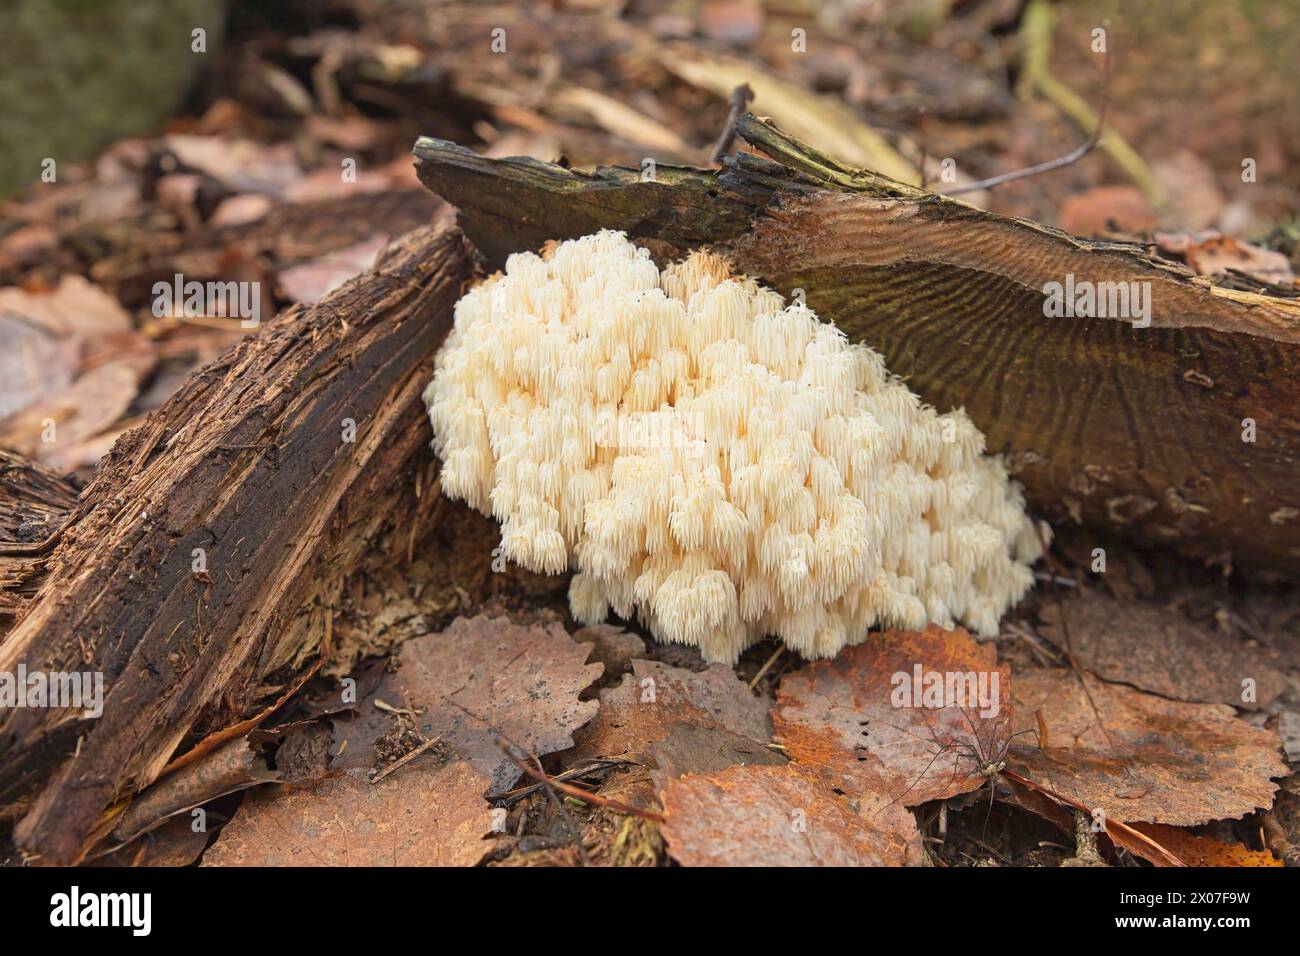 Closeup of edible mushroom coral tooth fungus (hericium coralloides) growing on fallen tree branch in autumn. Stock Photo